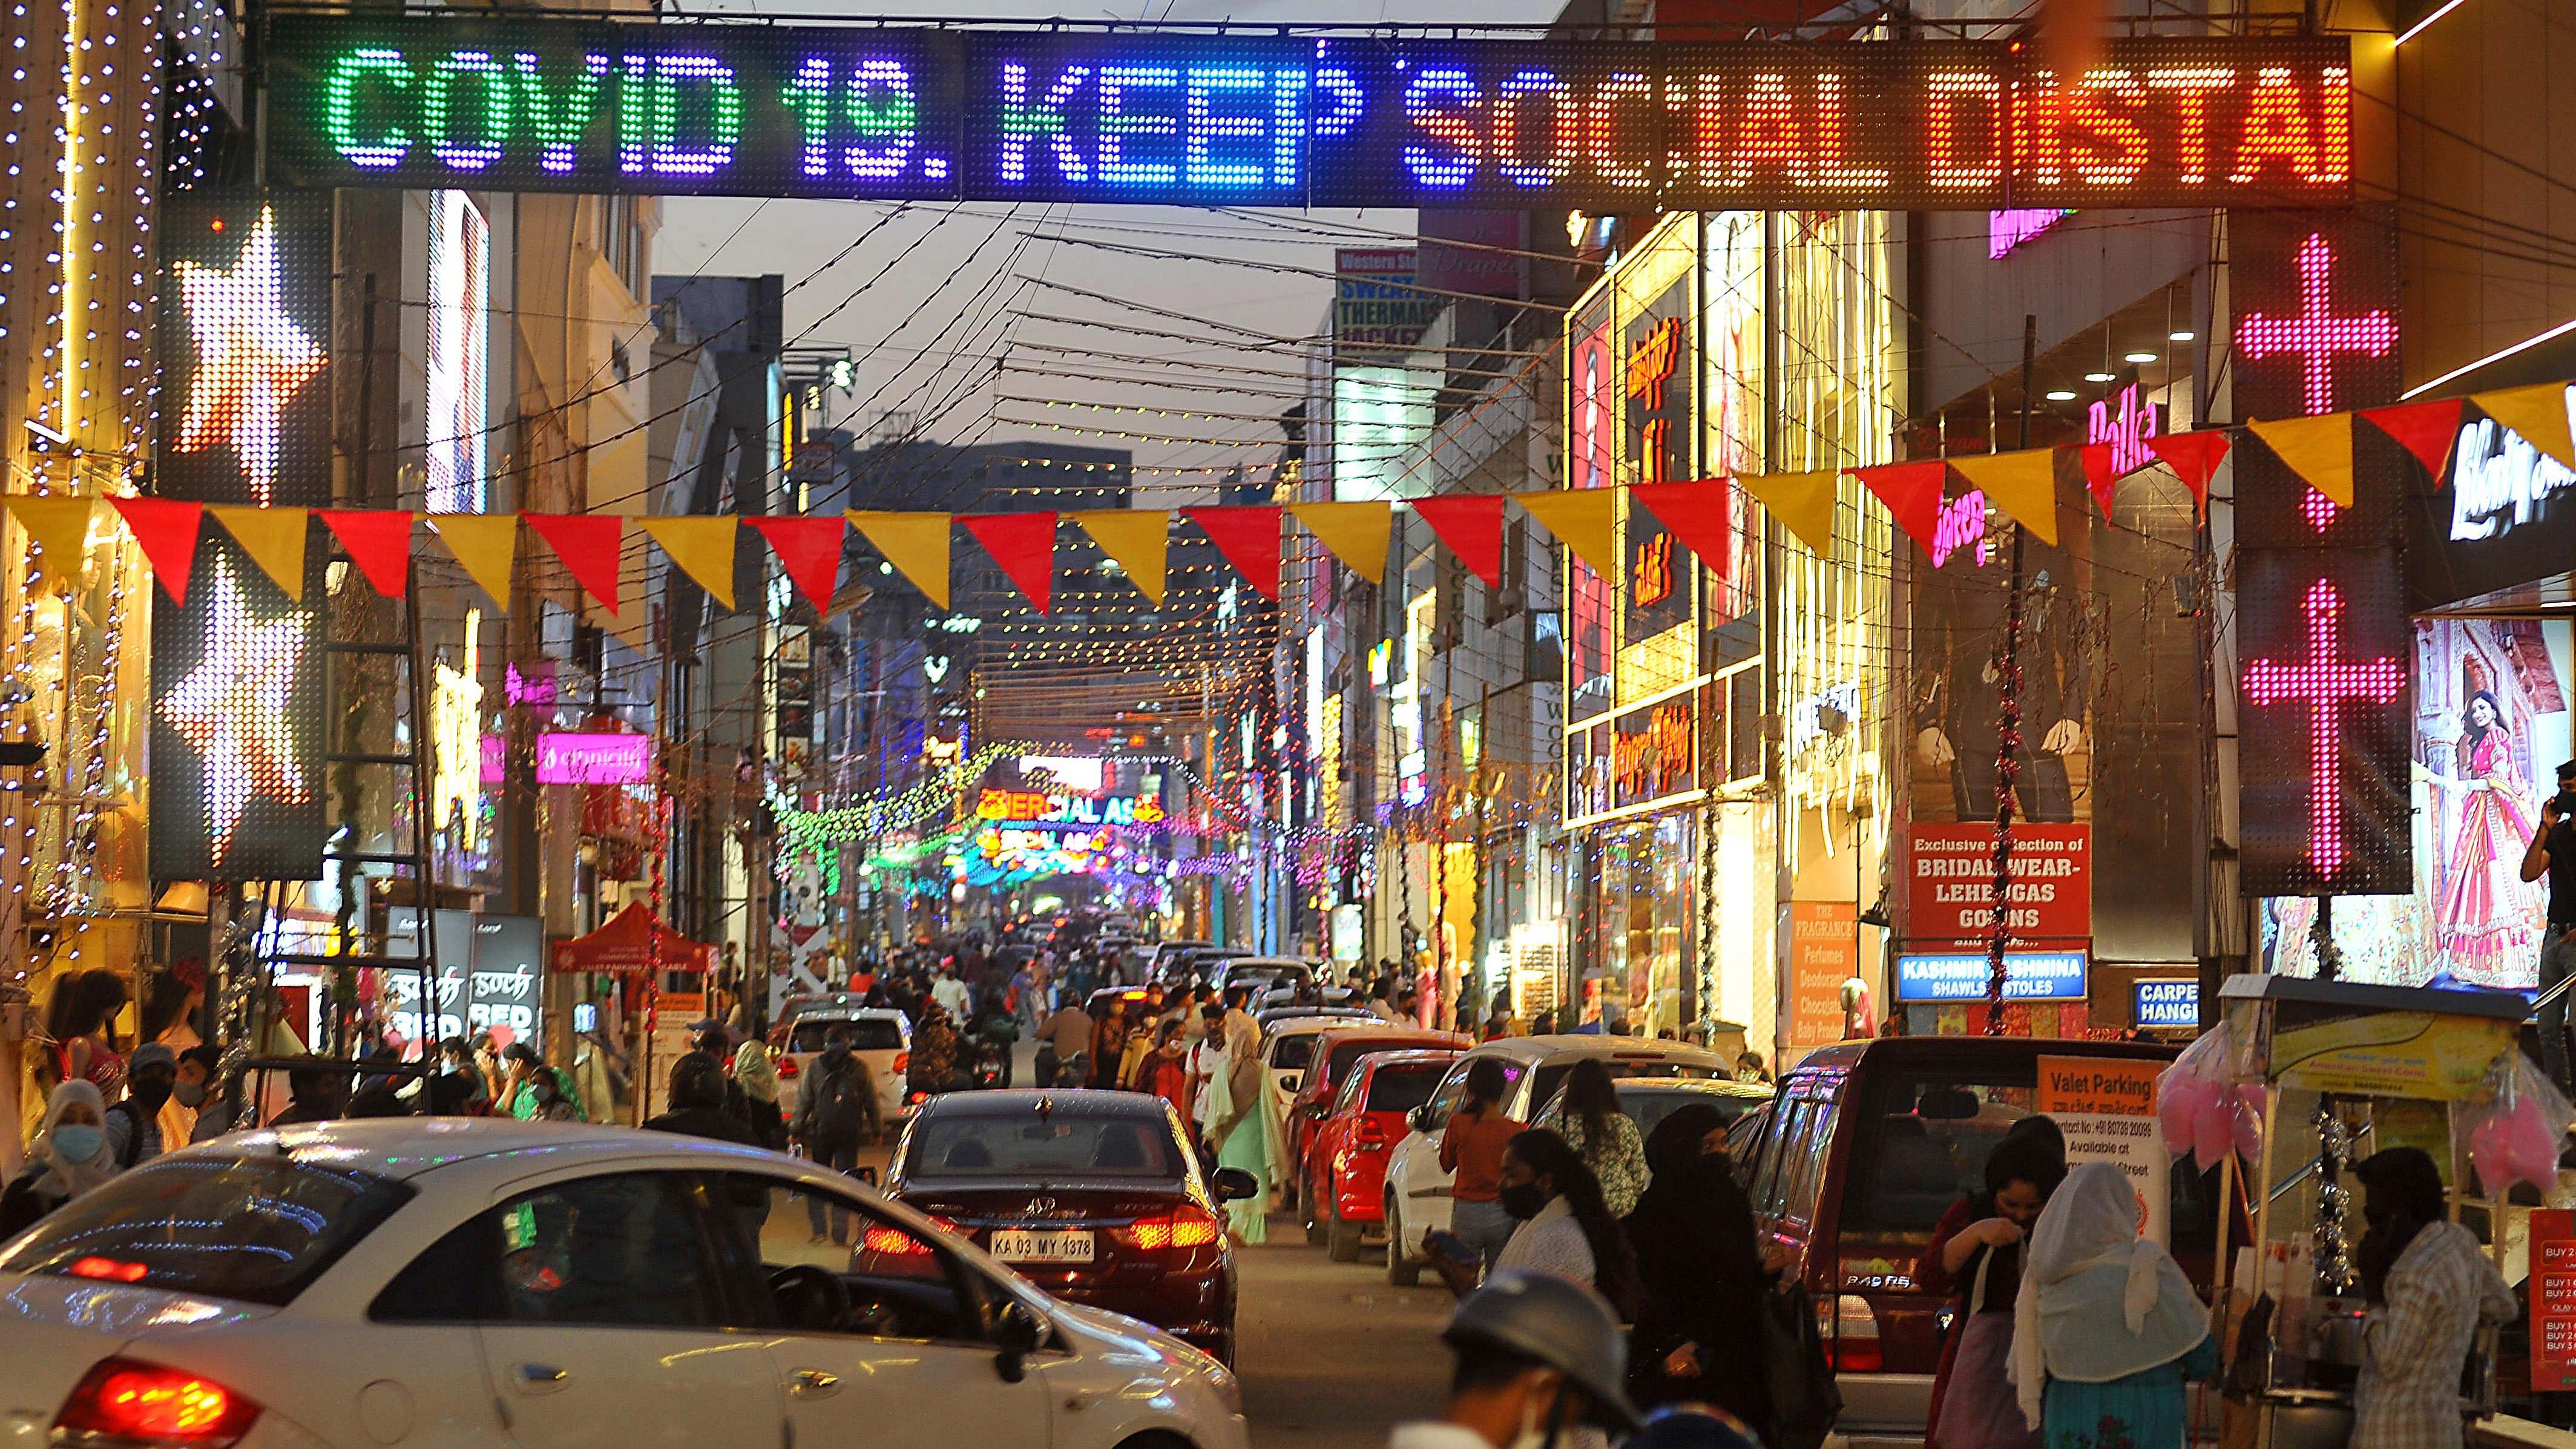 Commercial Street is lit up with colourful lights for New Year celebrations in Bengaluru on Wednesday. DH Photo/Pushkar V